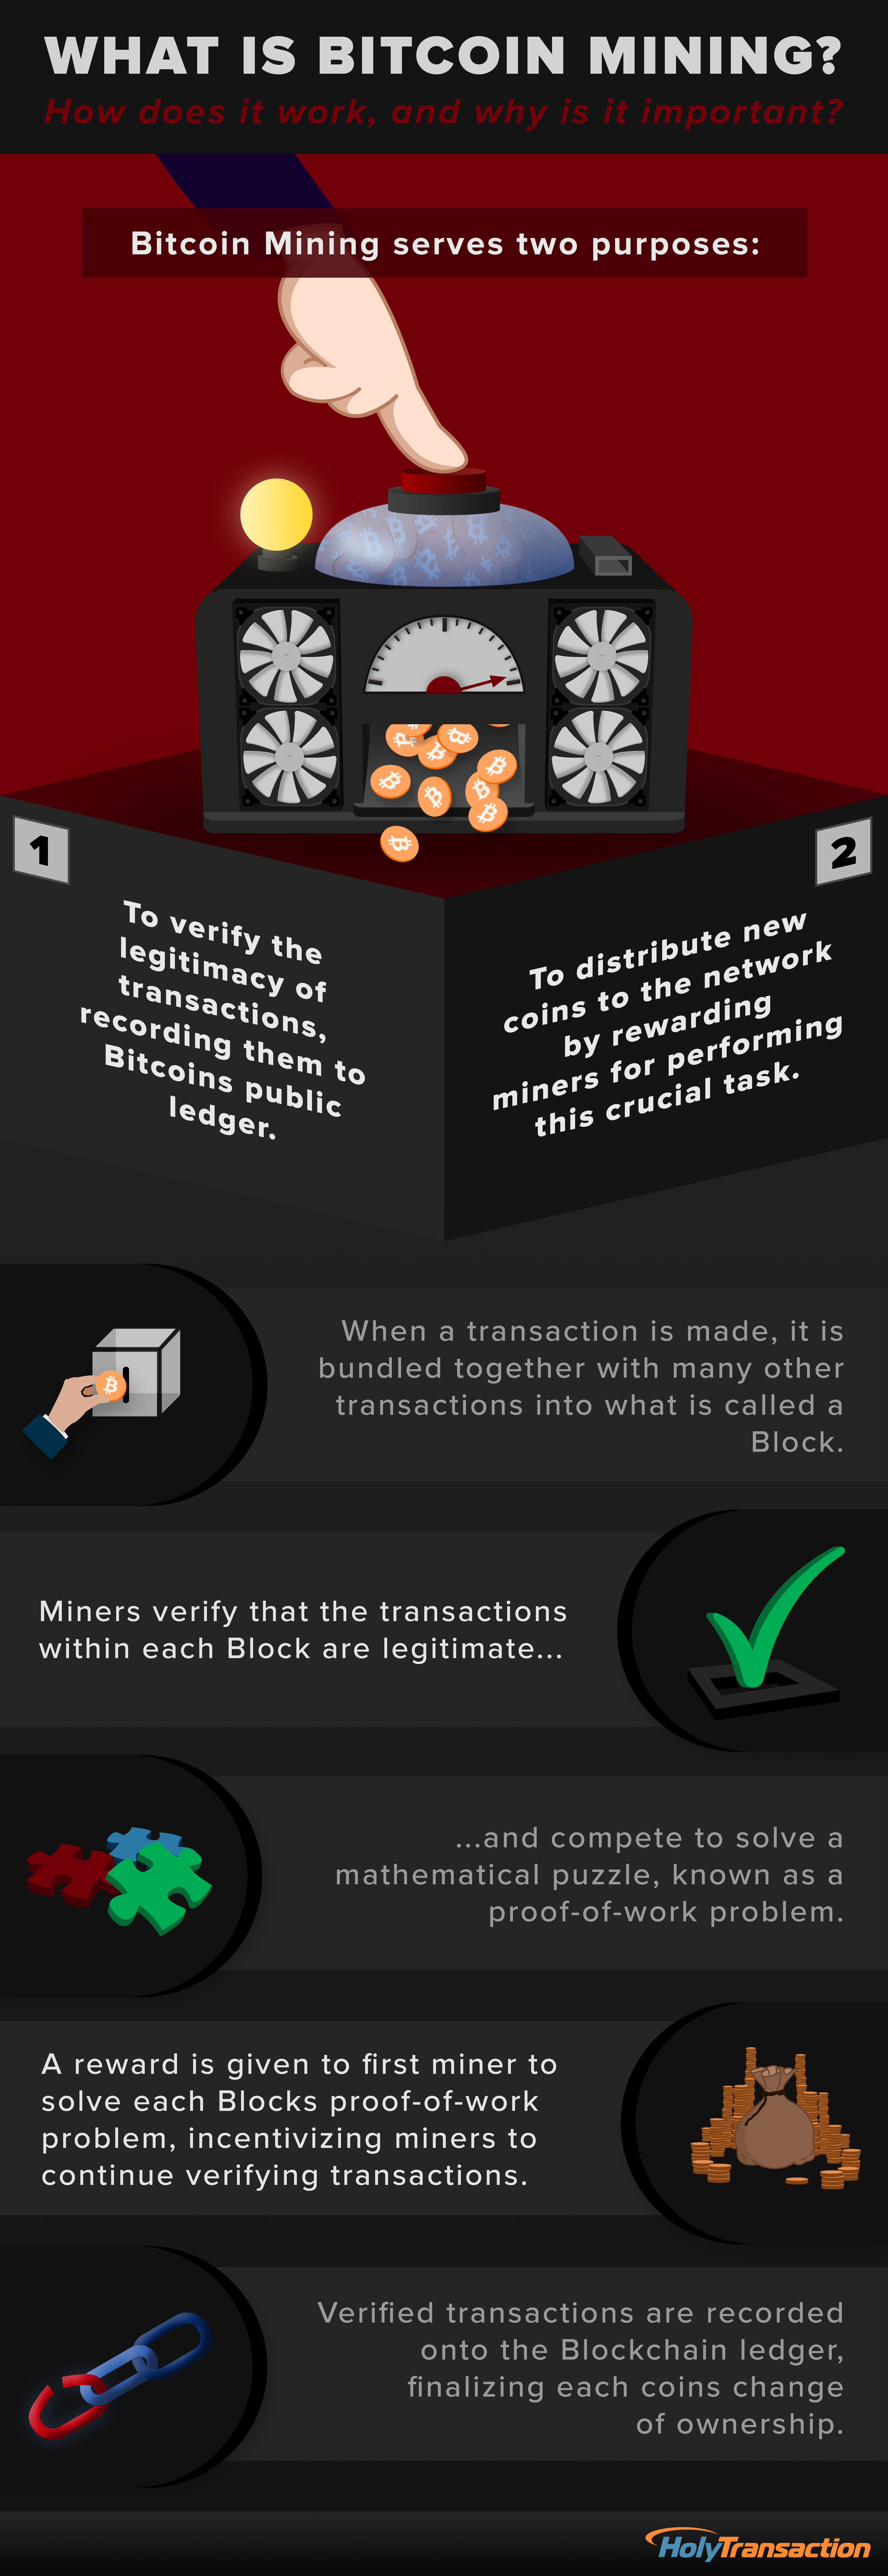 What is Bitcoin Mining? - Infographic